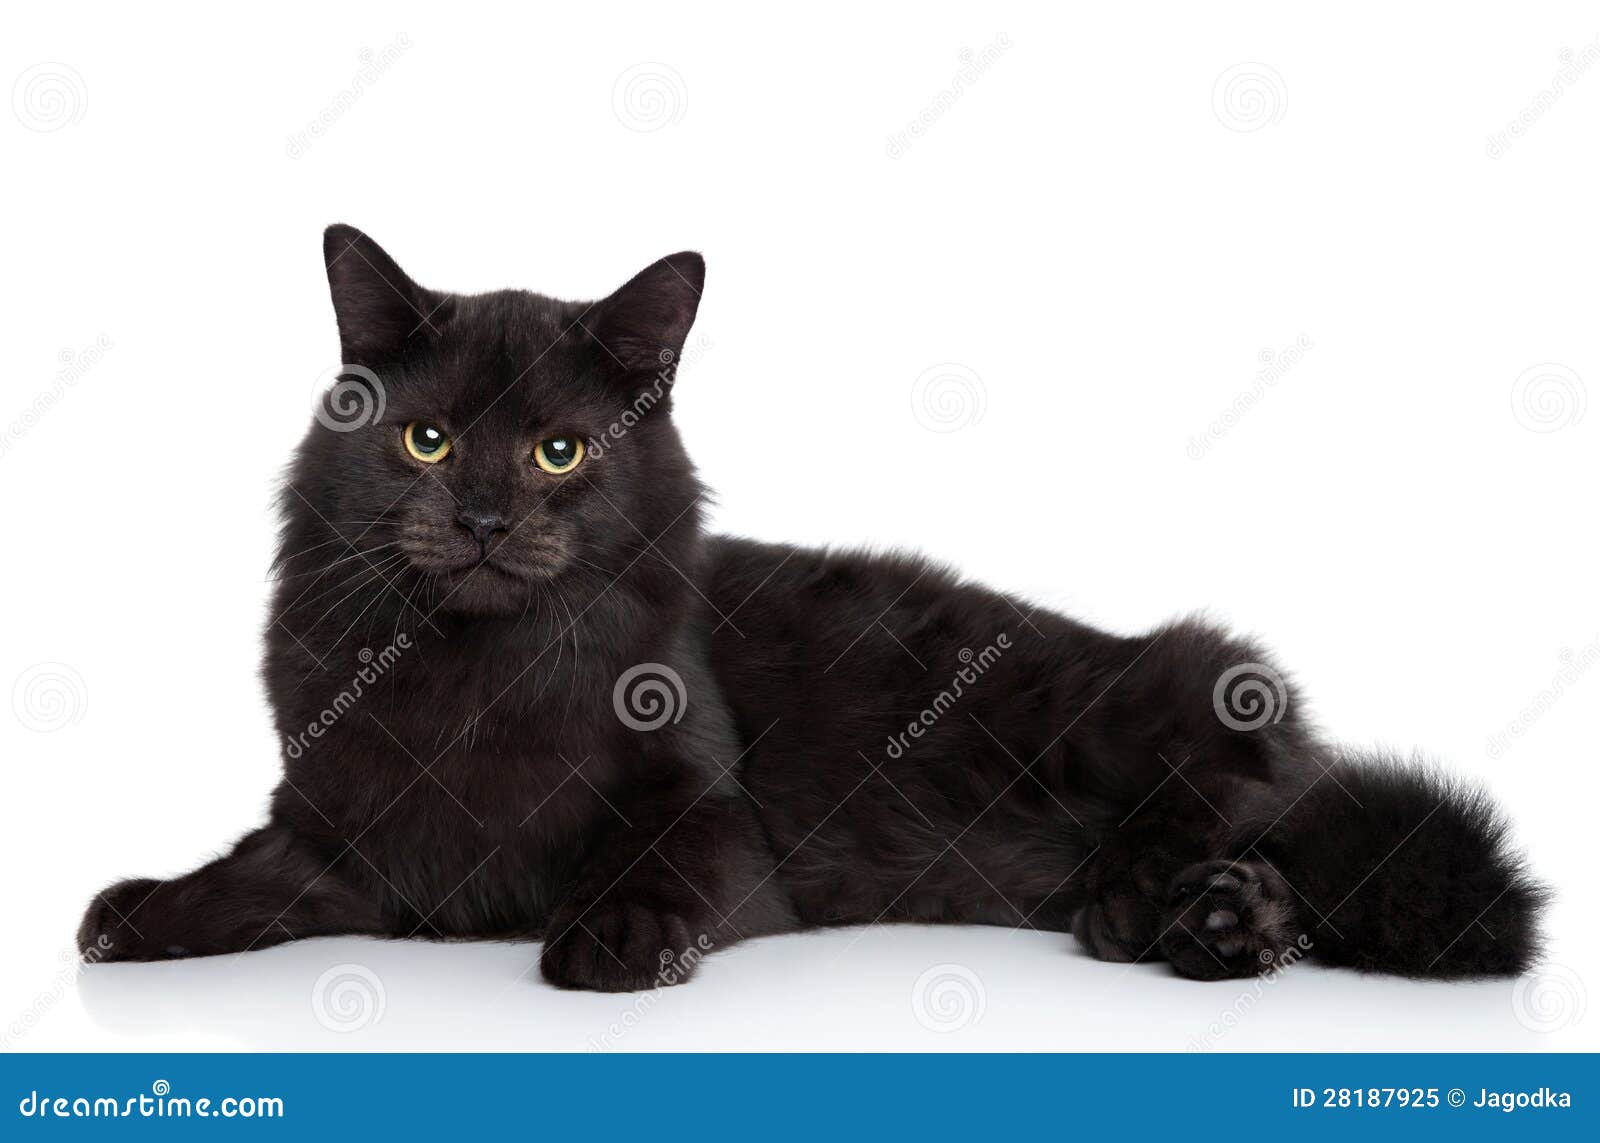 siberian cat on a white background